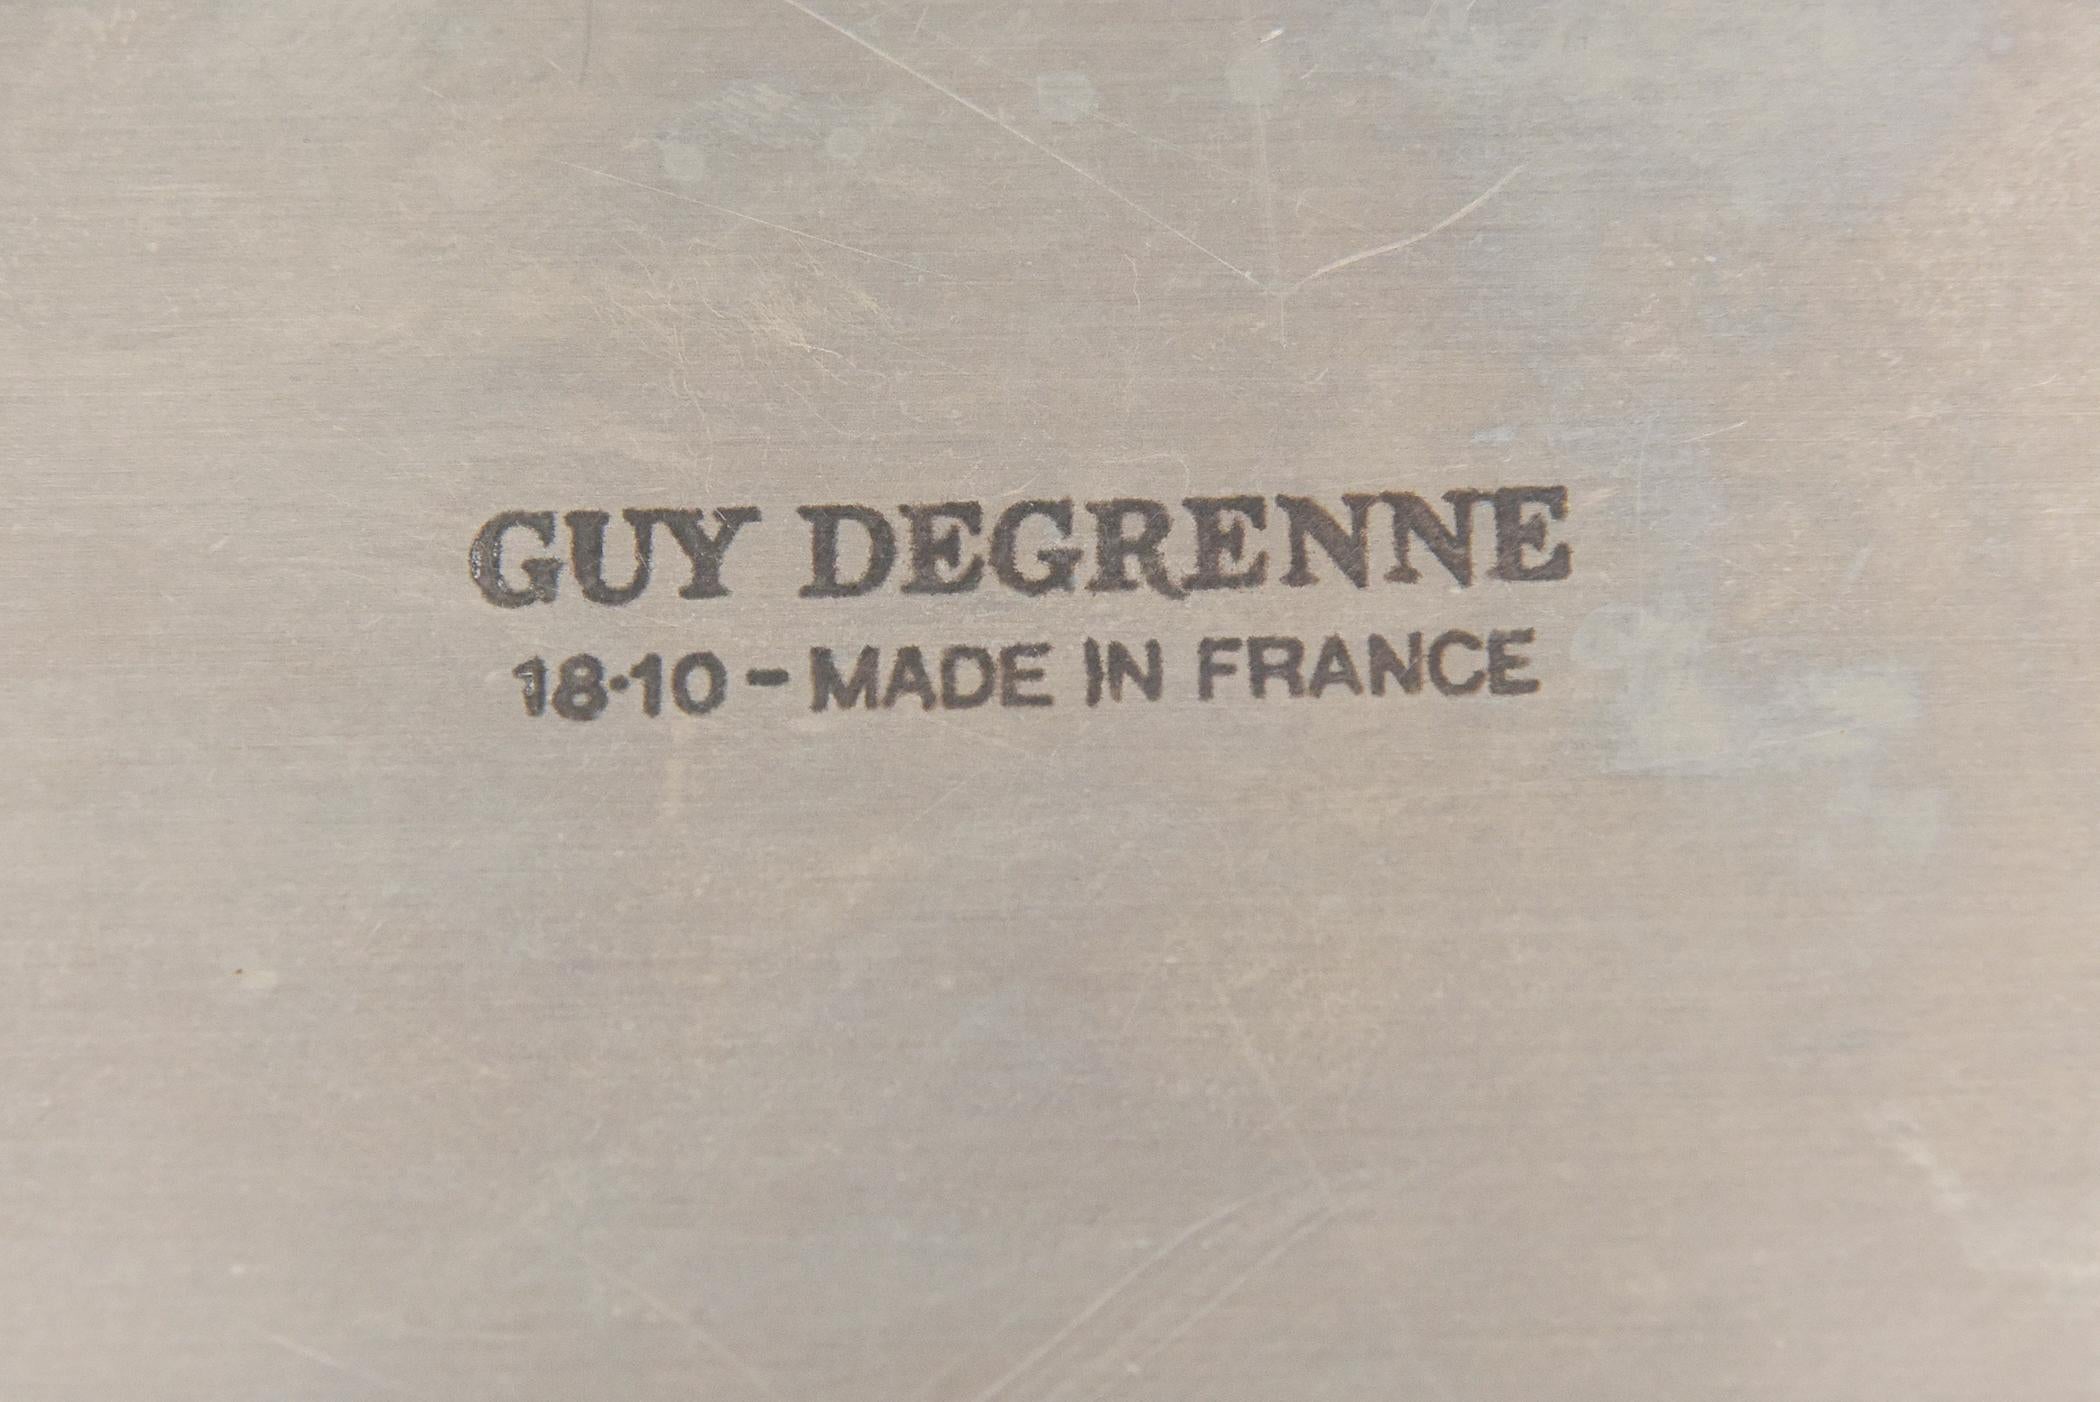 Laiton Guy Dugrenne Signé Burled Wood, Gilt, Stainless Tray or Barware French en vente